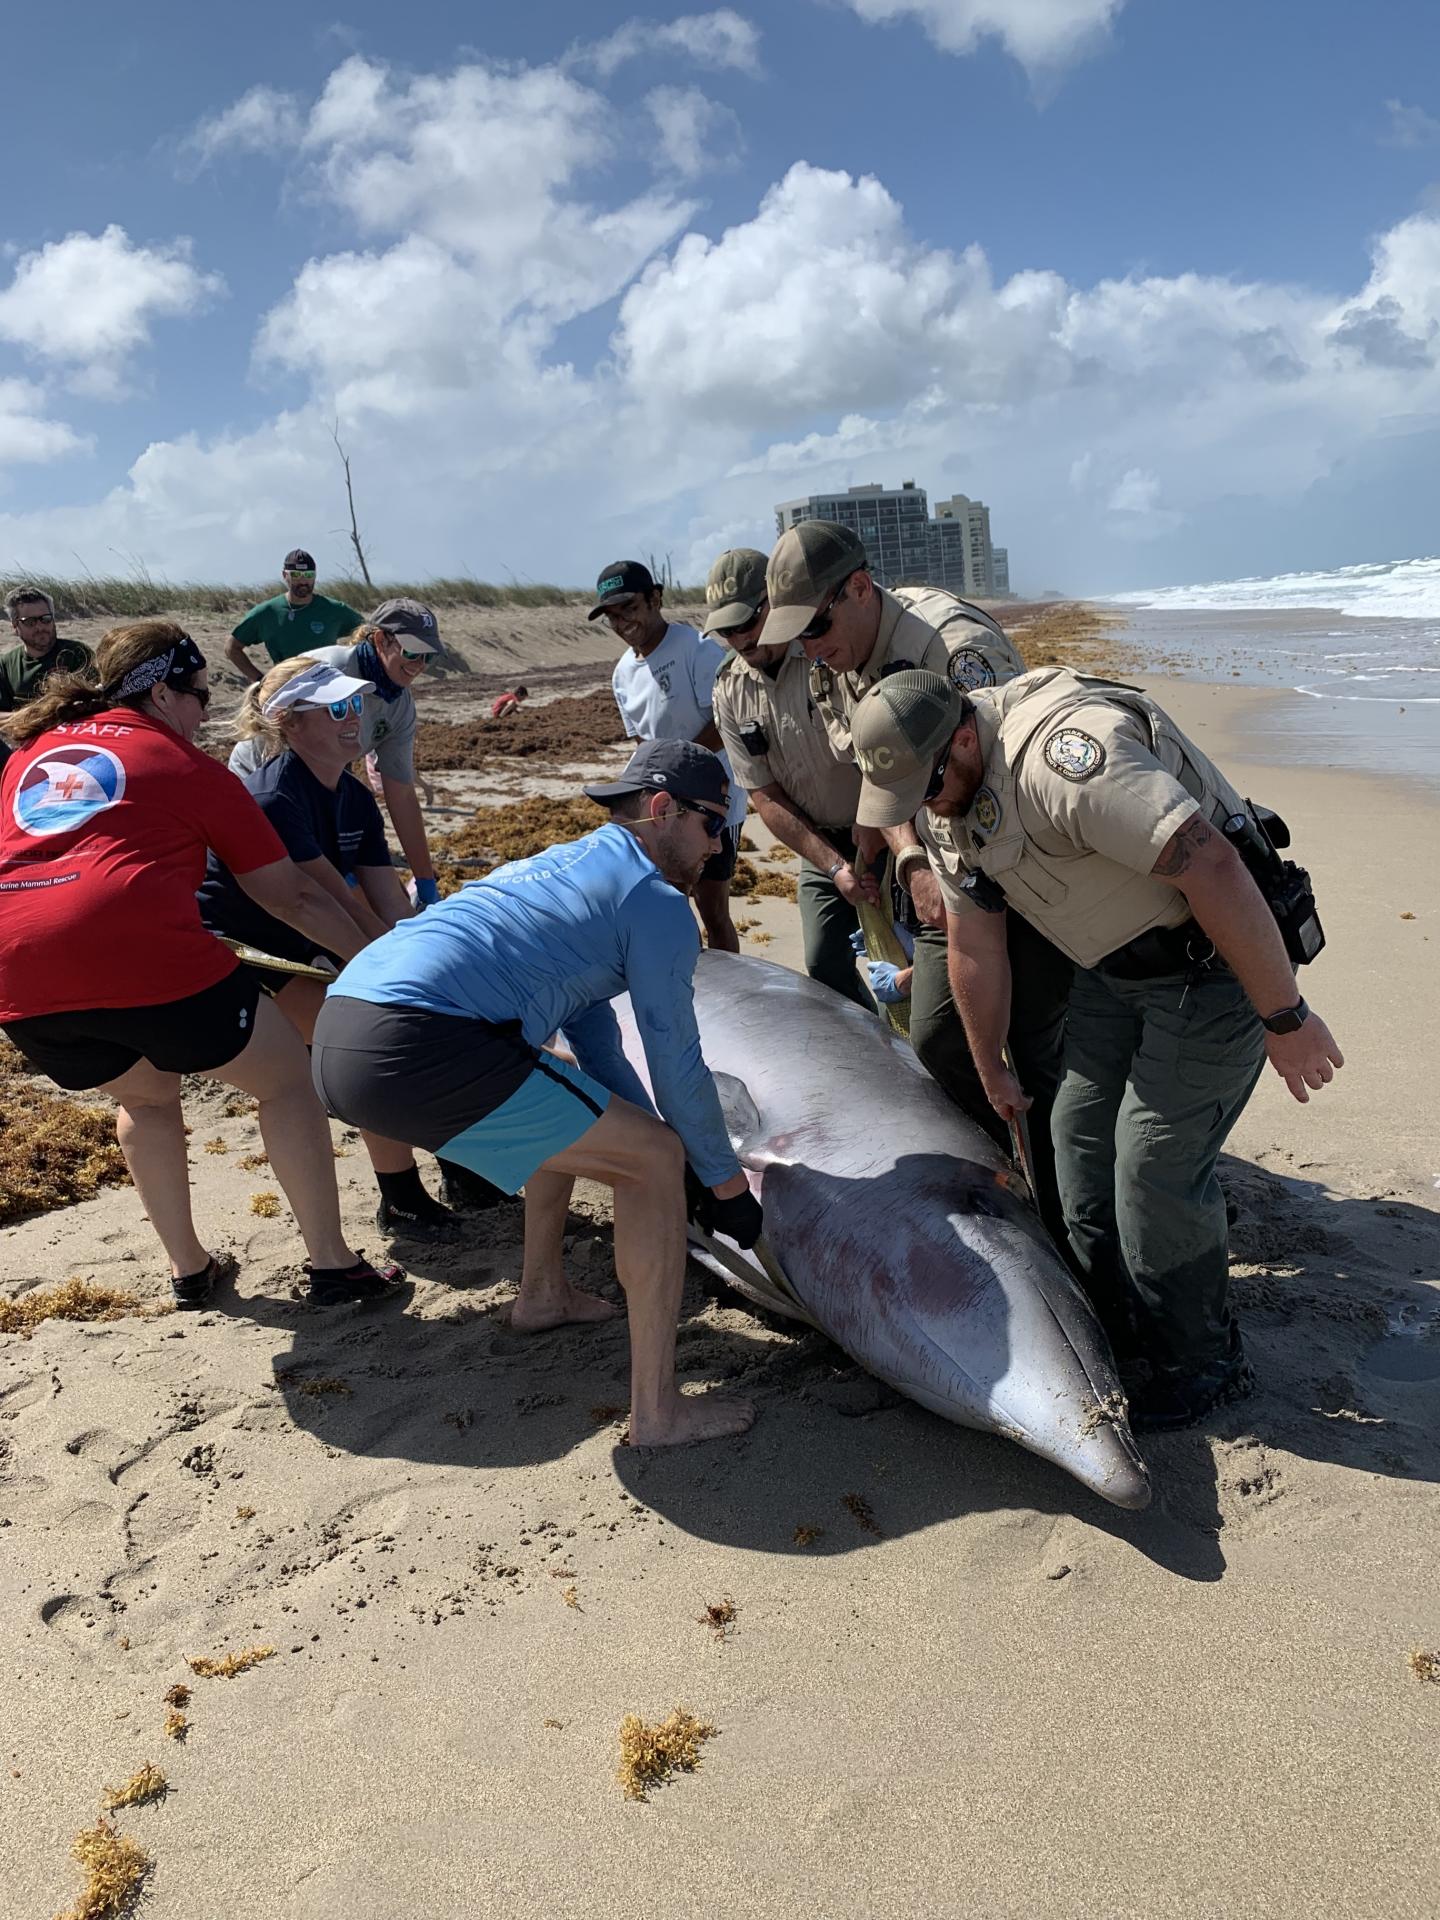 A Gervais' beaked whale being moved up the beach in St. Lucie county, Florida.  (Image: Annie Page-Karjian)